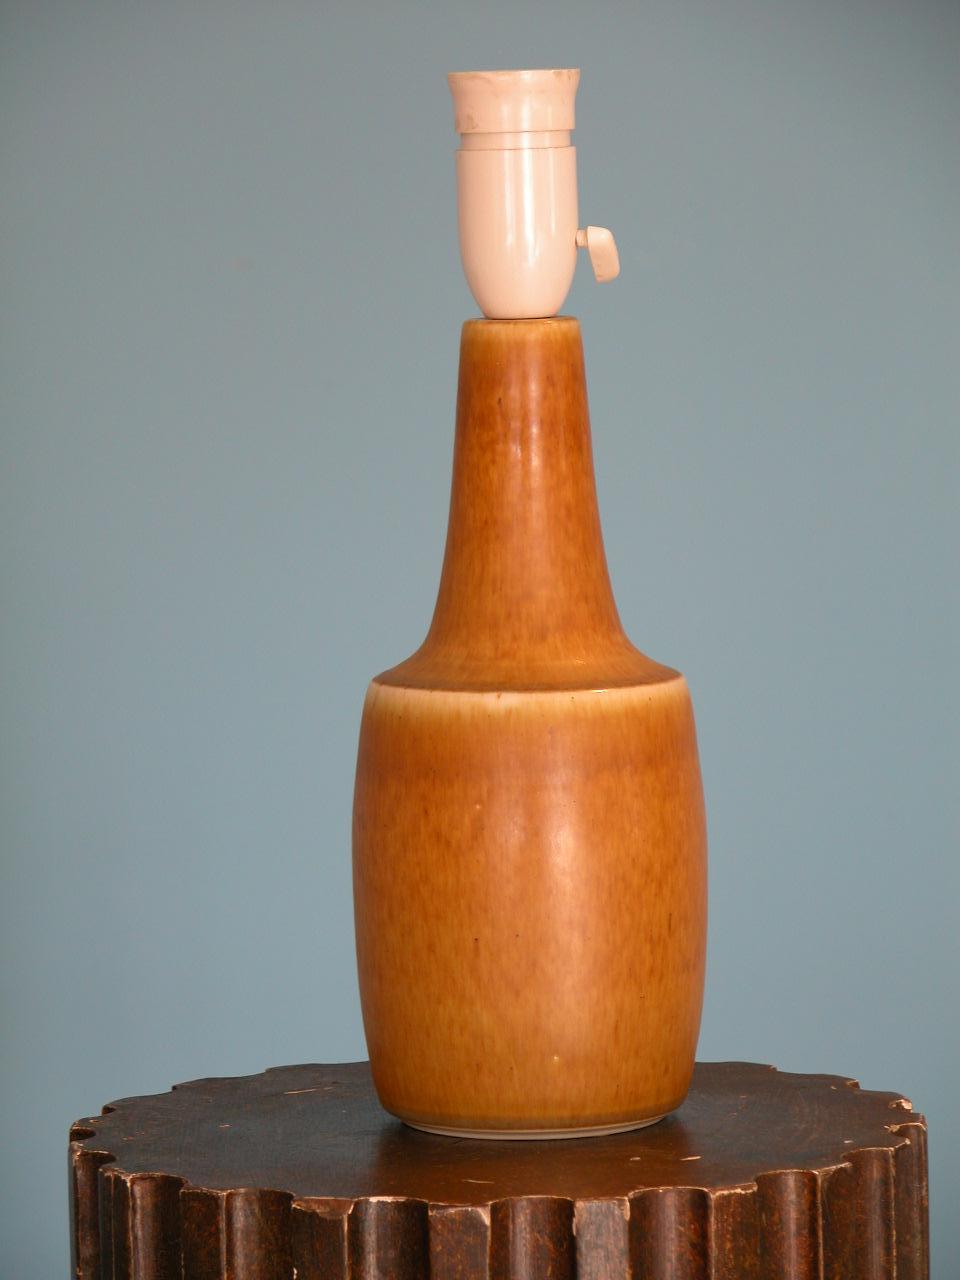 Midcentury, Danish table lamp, stoneware with Hare's Fur Glaze, Origin: Bornholm Møbelfabrik, Denmark, circa 1940

Hare’s Fur is named because it is said to resemble the fur of a hare.
 